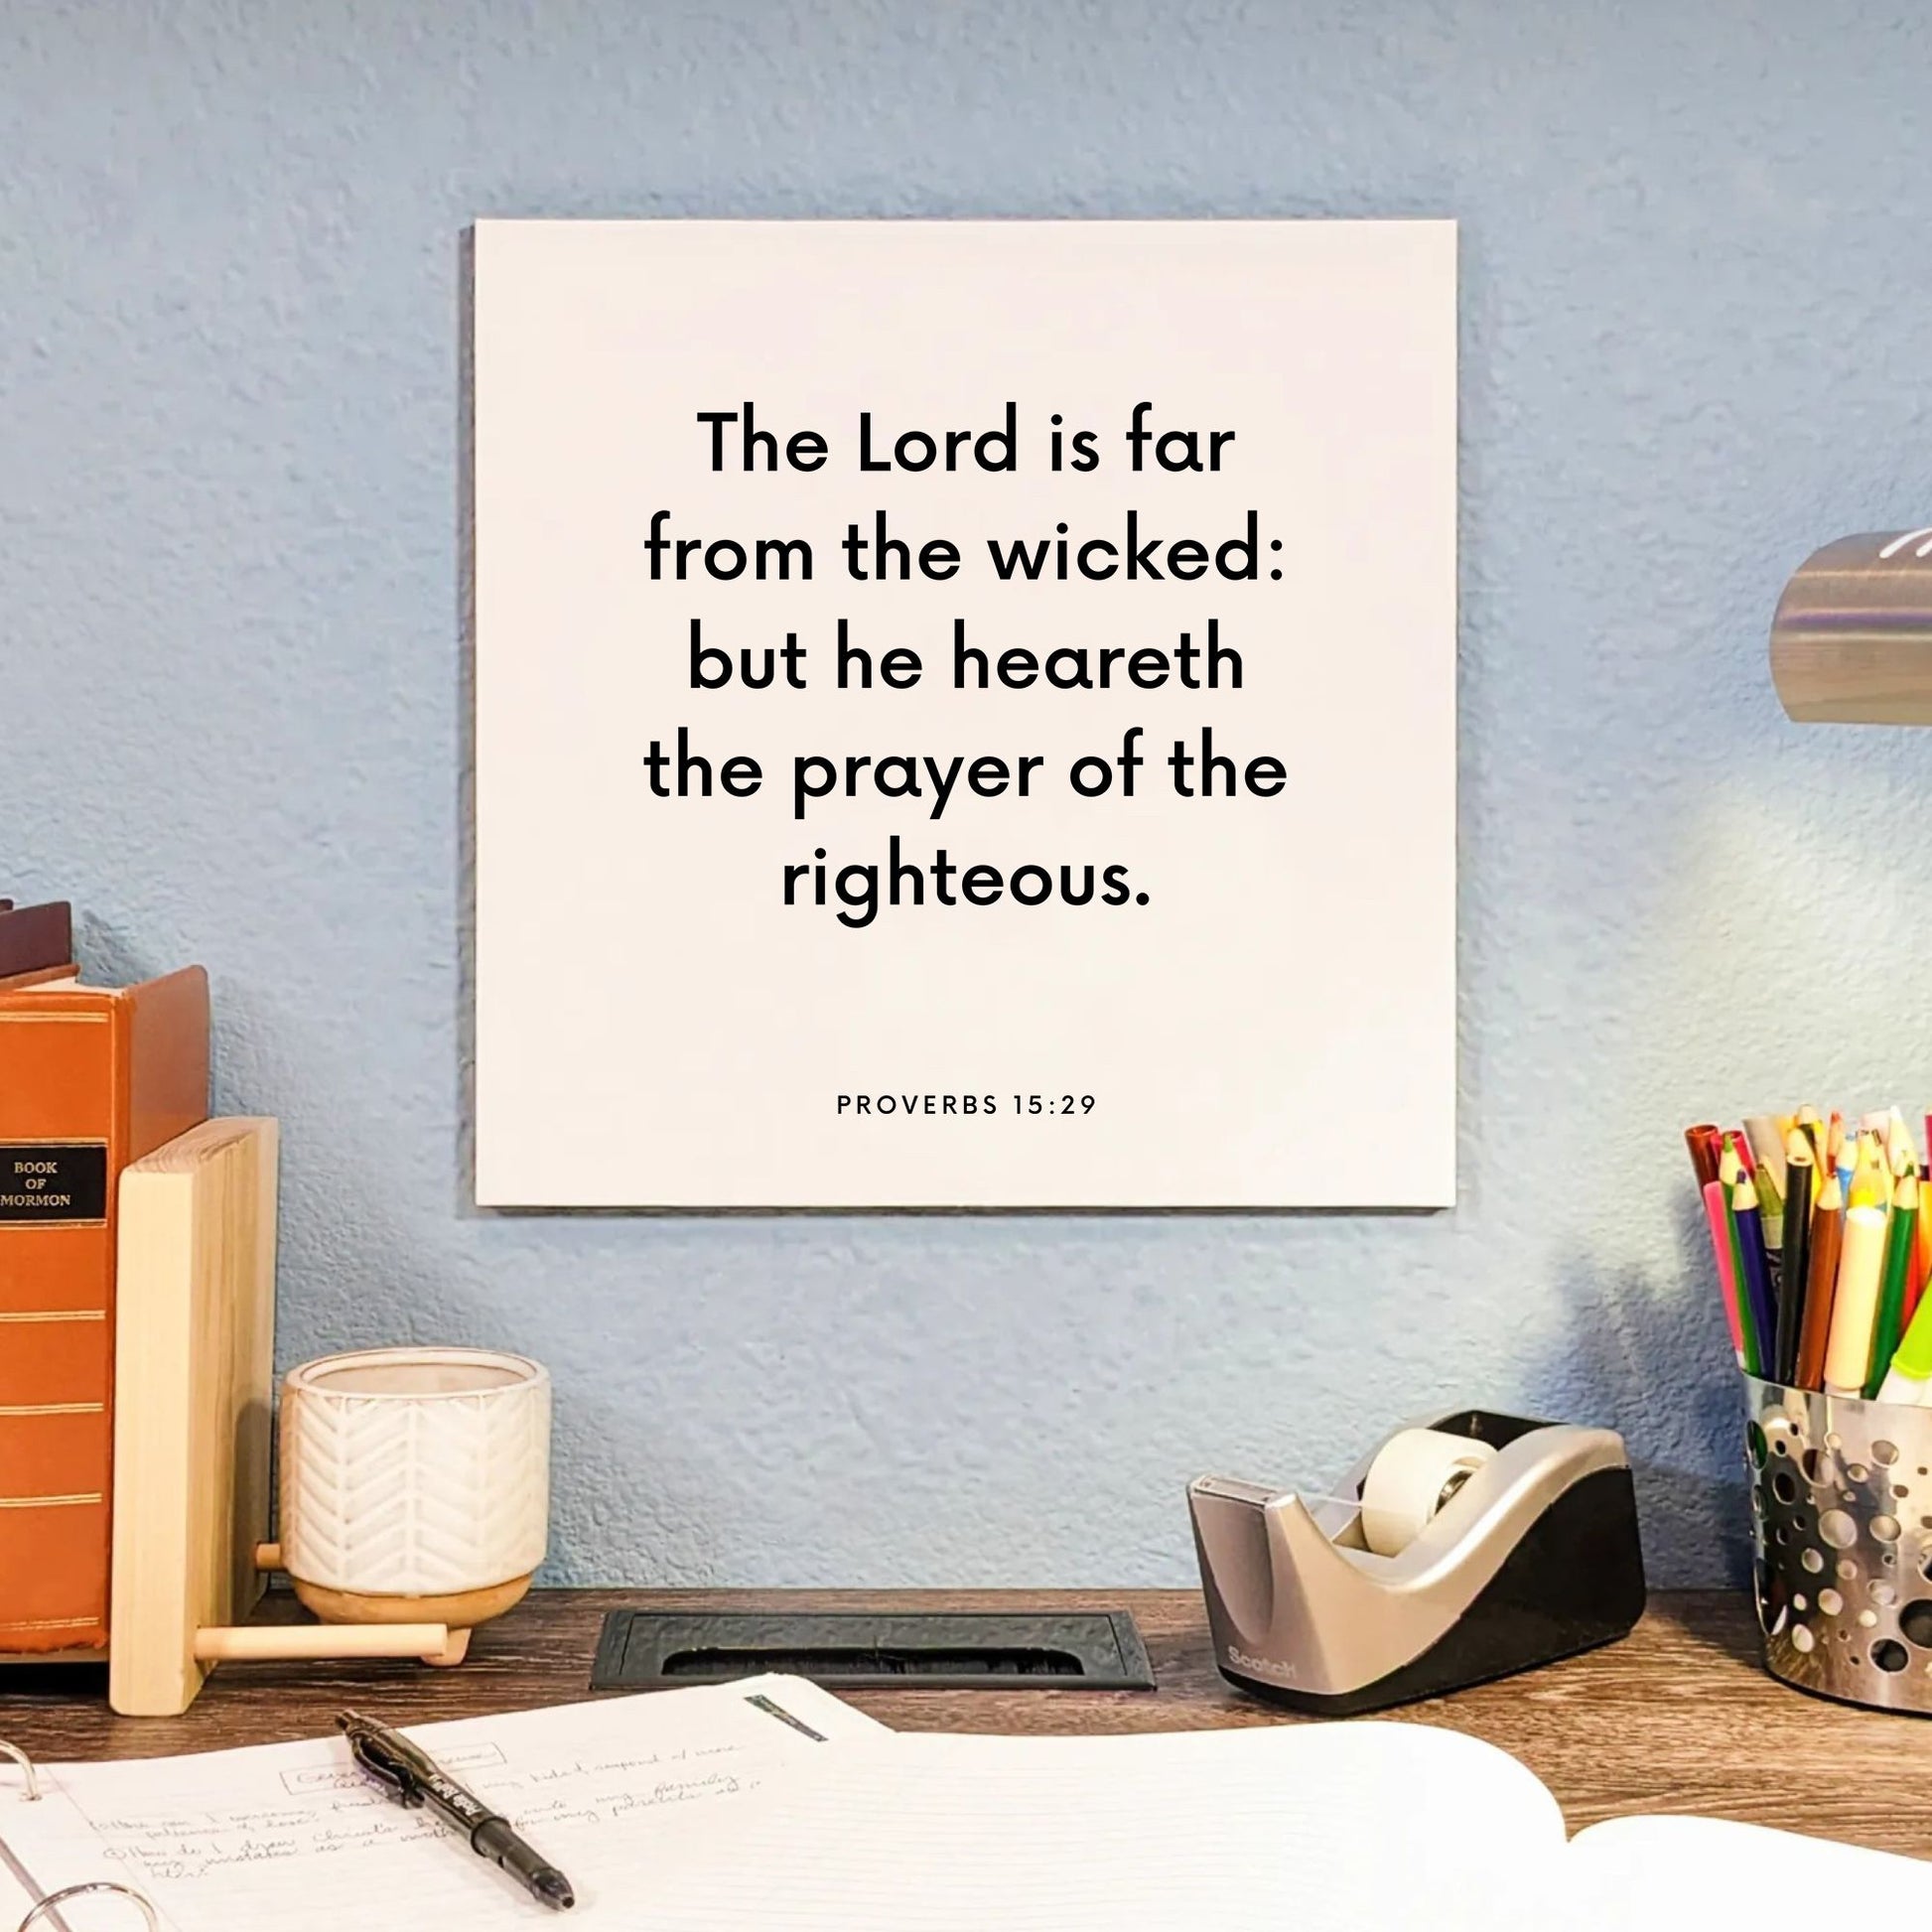 Desk mouting of the scripture tile for Proverbs 15:29 - "He heareth the prayer of the righteous"